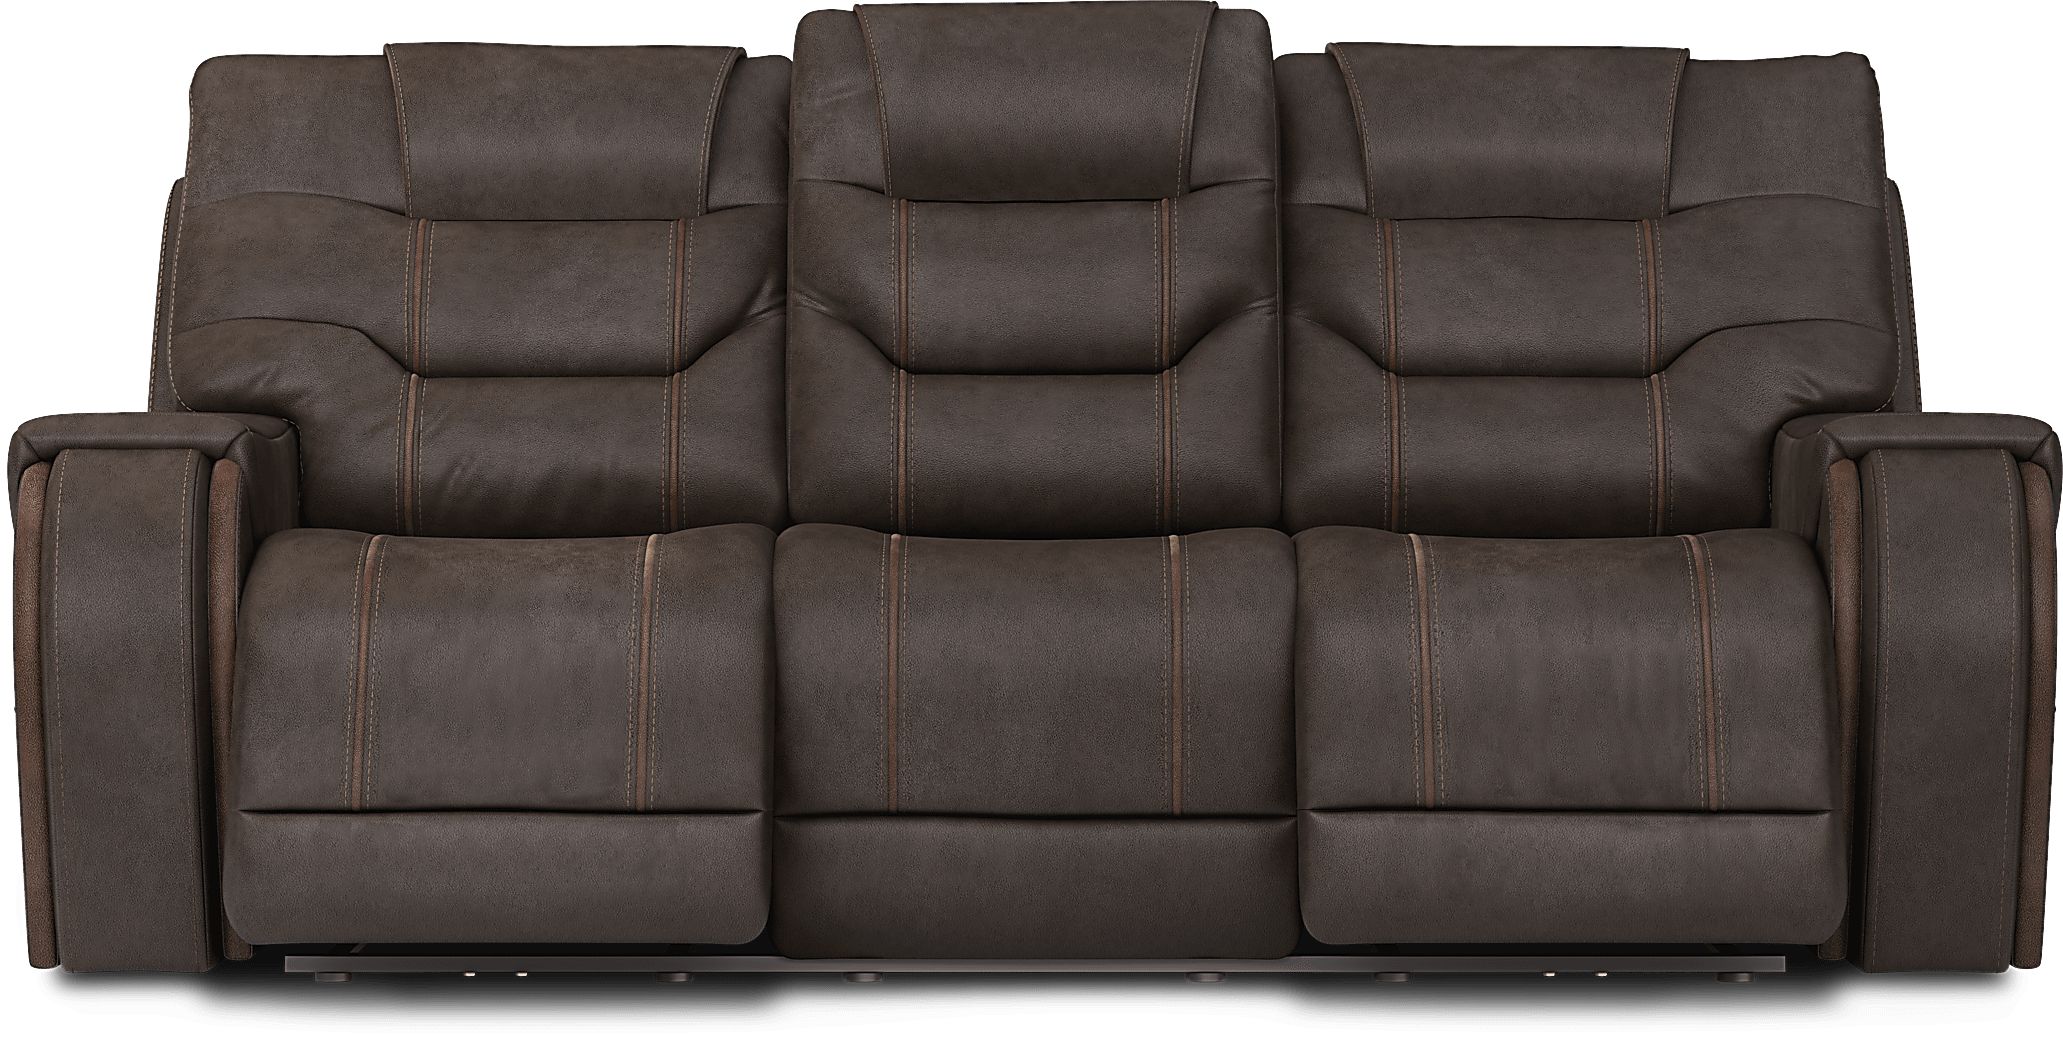 Laredo Springs Brown 5 Pc Living Room with Reclining Sofa